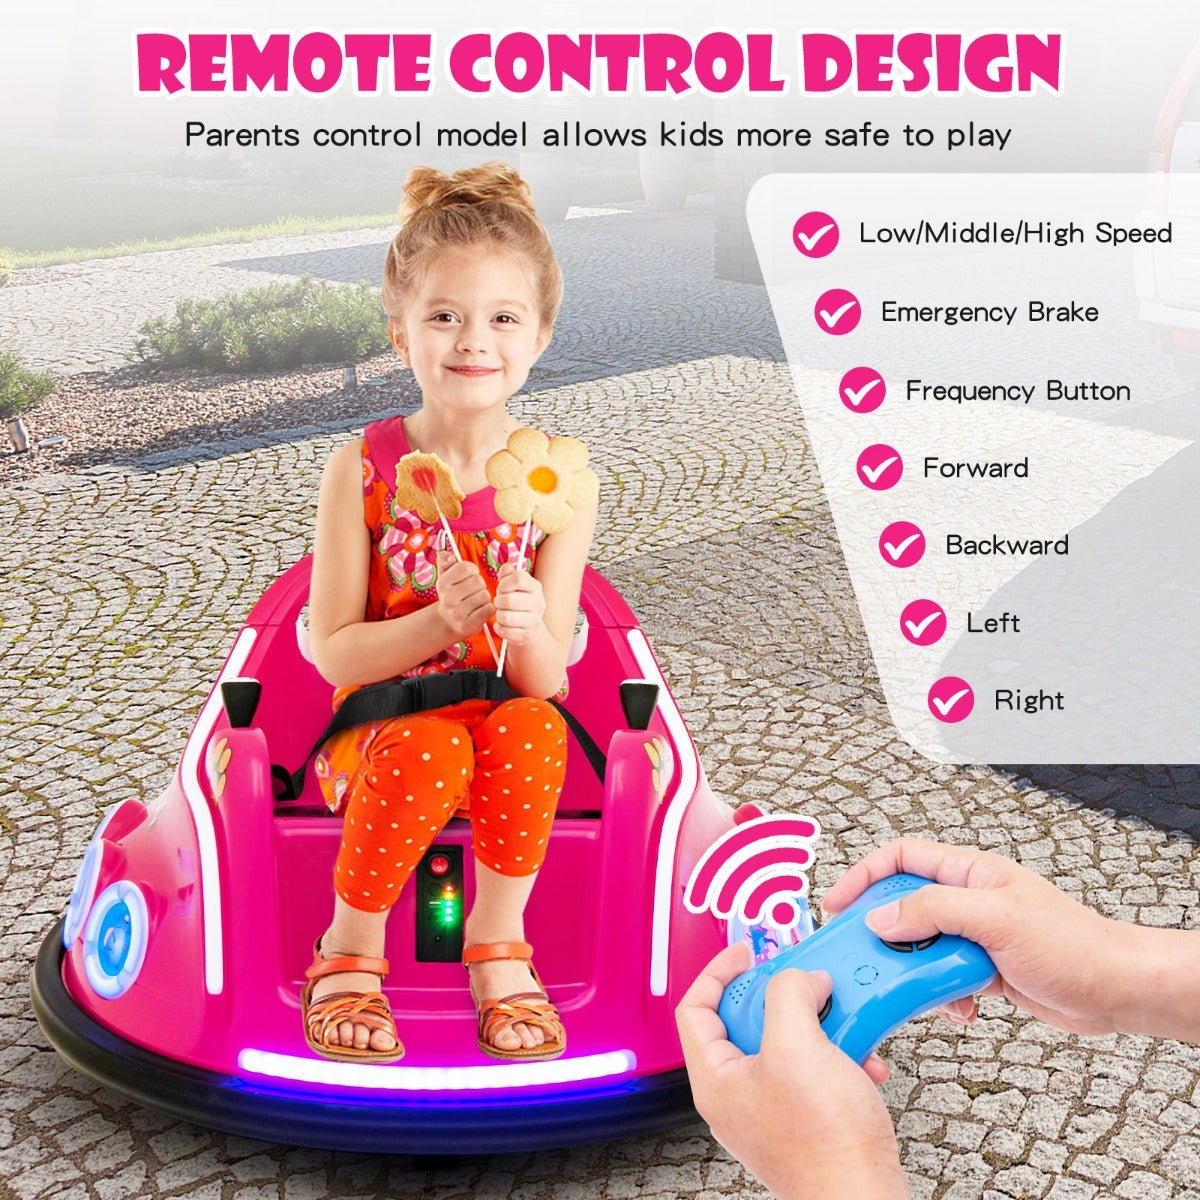 Buy the Pink Electric Bumper Car - Fun and Thrills Await